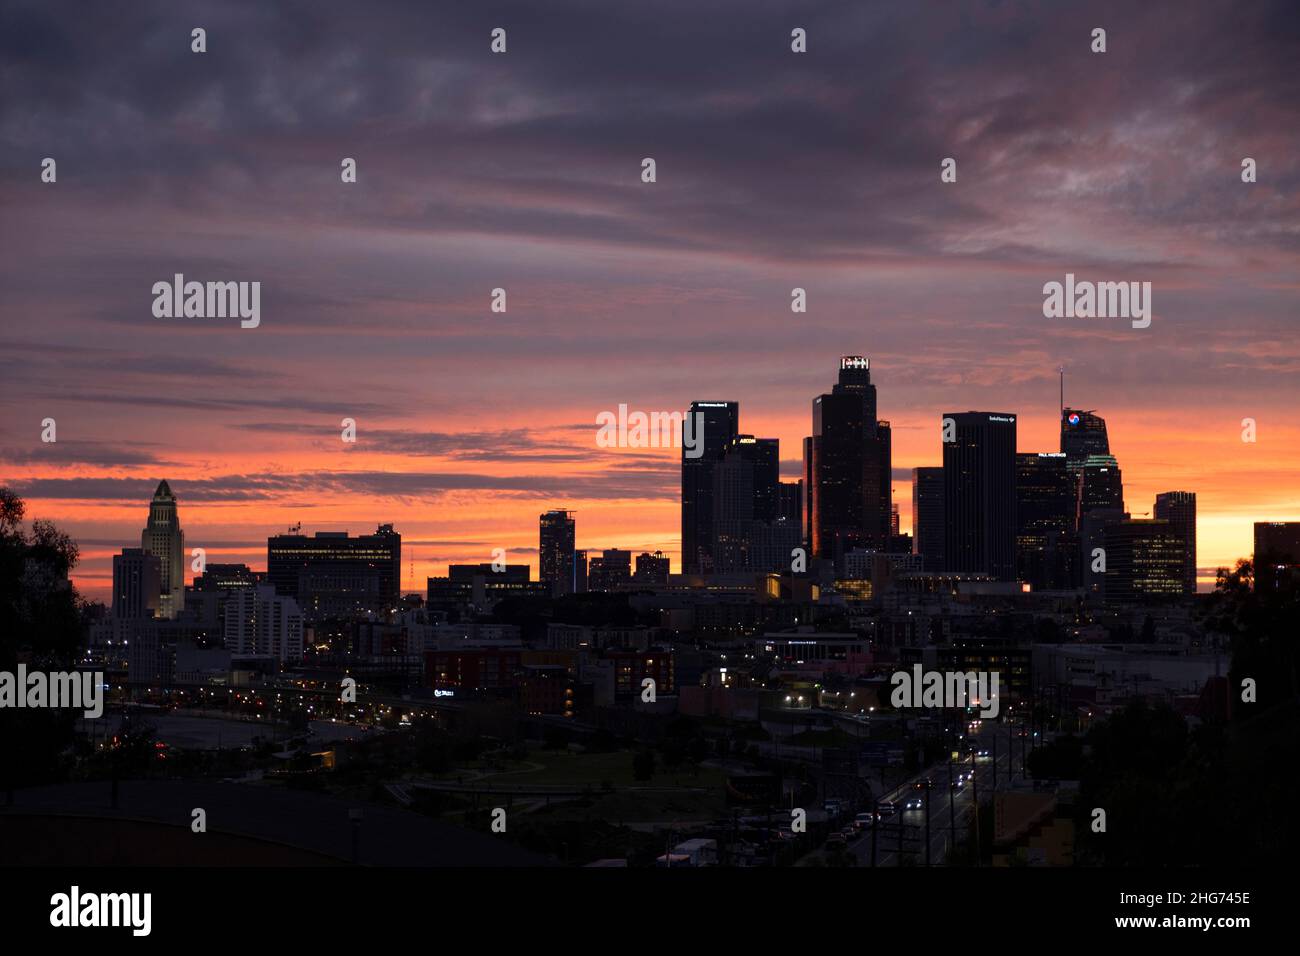 Silhouette of the downtown Los Angeles skyline with a colorful fading sunset backdrop Stock Photo